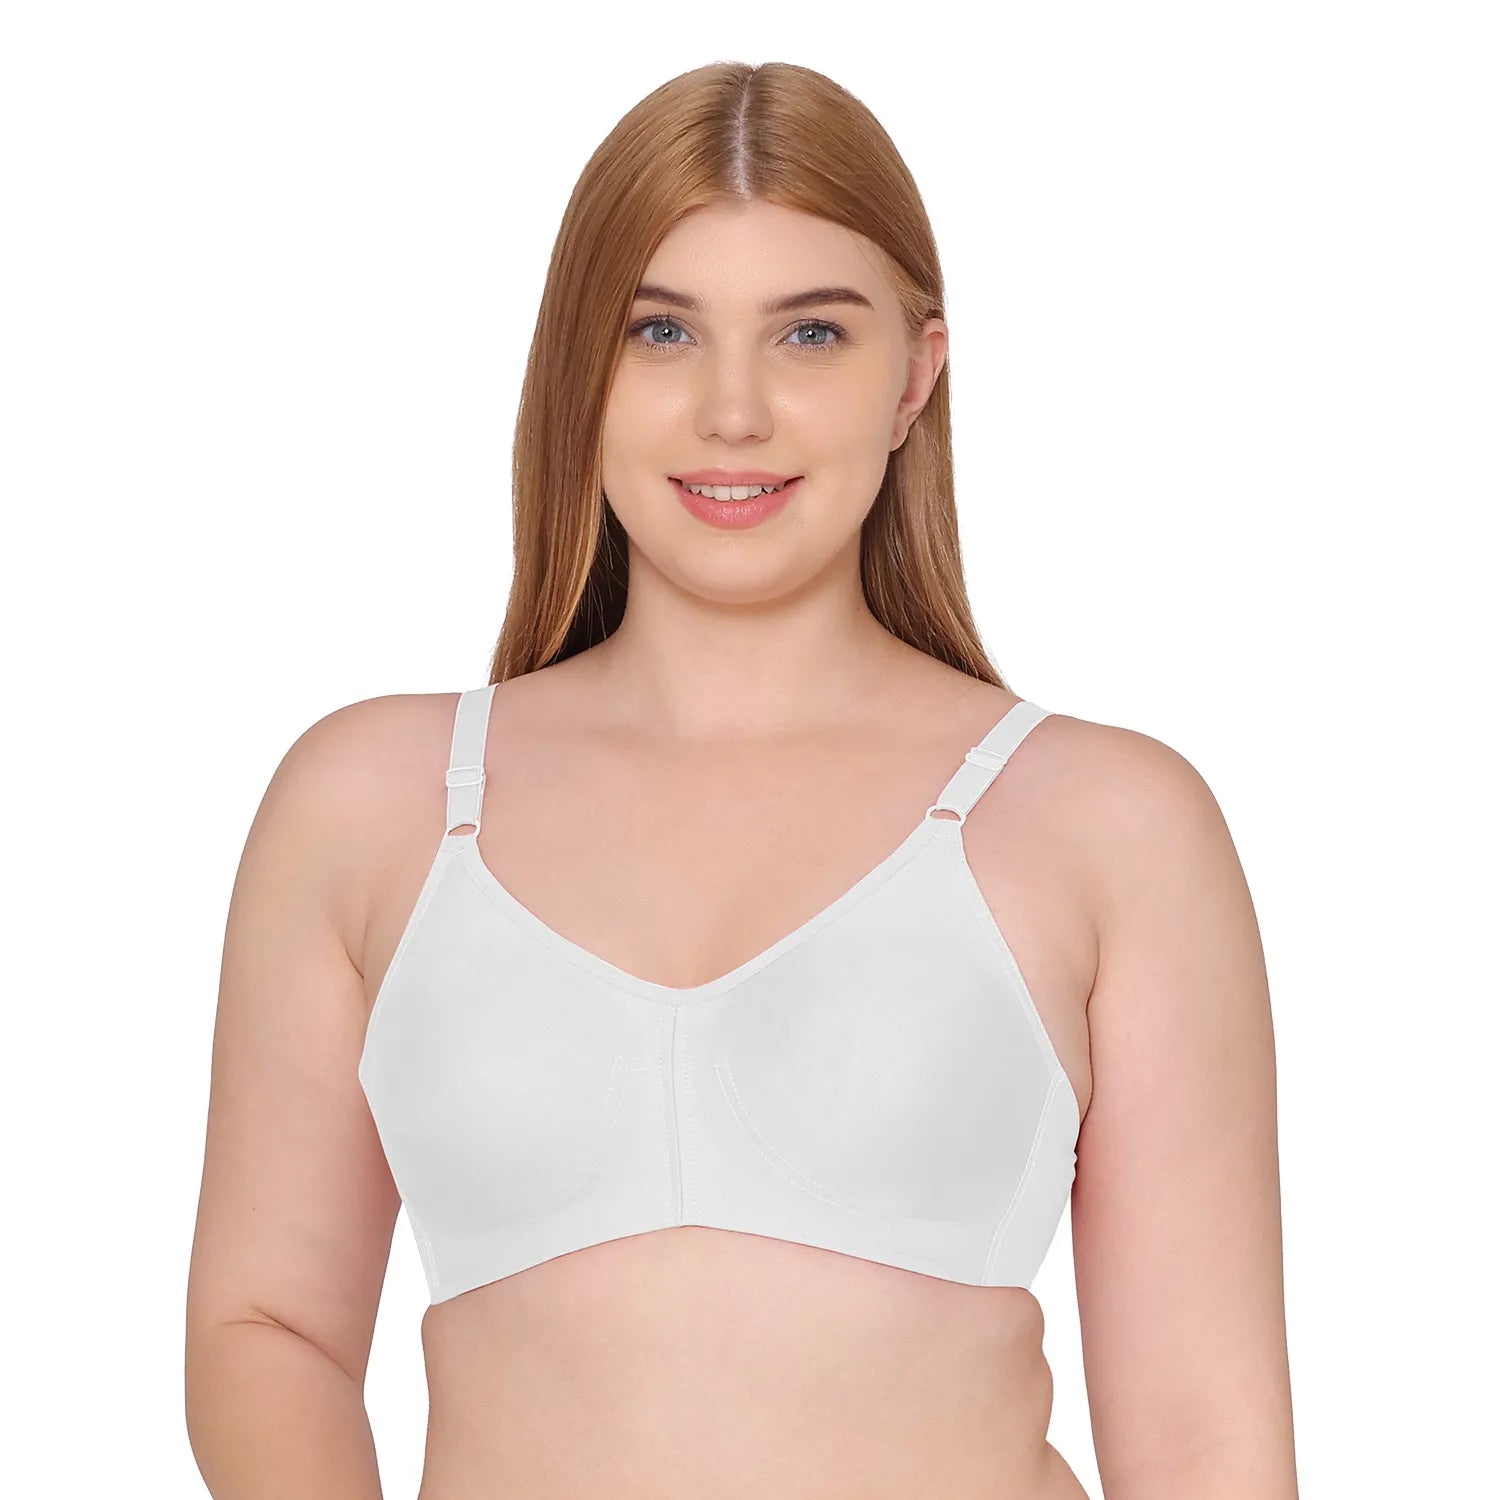 Souminie SEAMLESS Double Layered Full Coverage Non-Wired Cotton